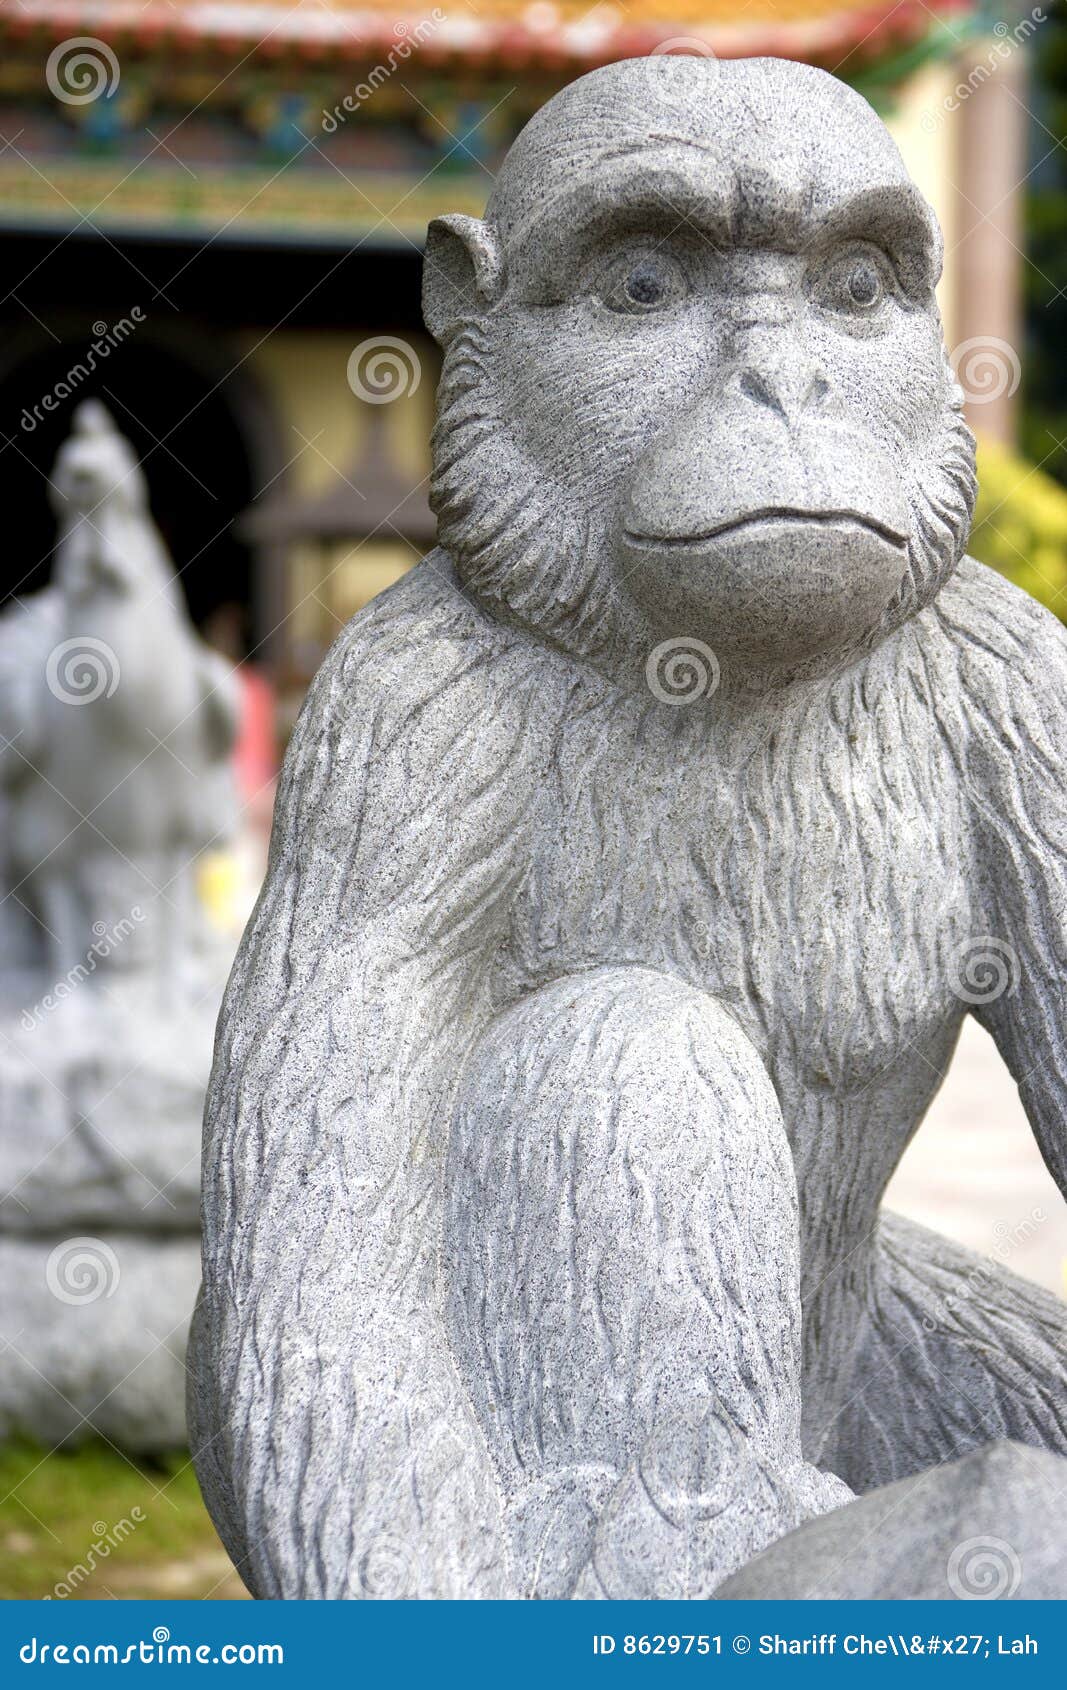 literature Monkeys and asian culture in